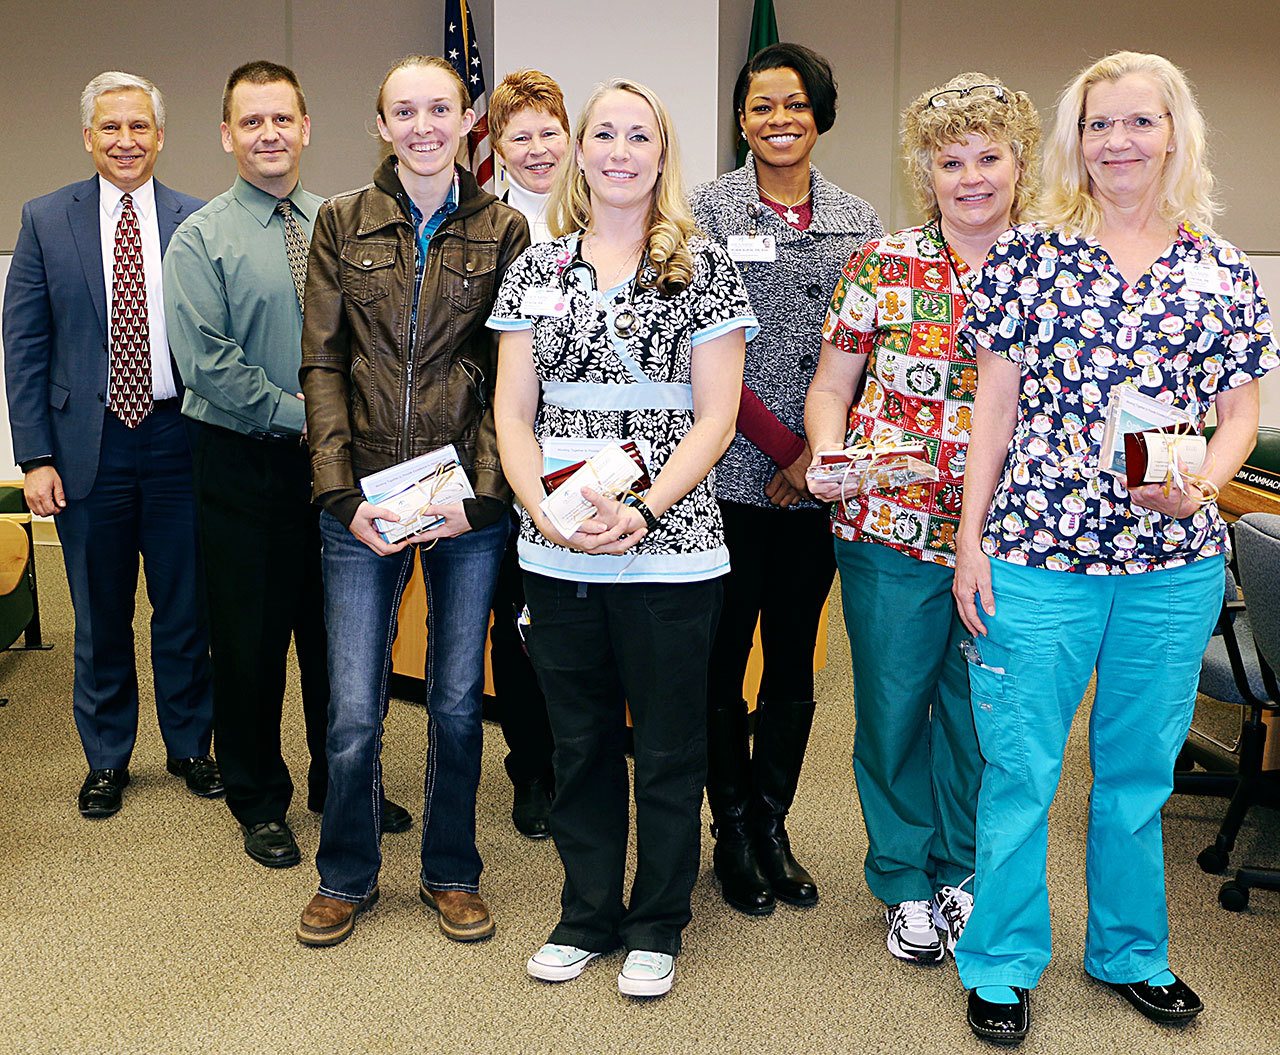 In front row, from left, are Olympic Medical Center employees Beverly Buck, CNA; Stacia Kiesser, RN; Julie Millsap, RN; and Cynthia Beltrami, RN. In back row from left are CEO Eric Lewis; Board President John Nutter; Lorraine Wall, RN, chief nursing officer; and Robin Burse, RN.